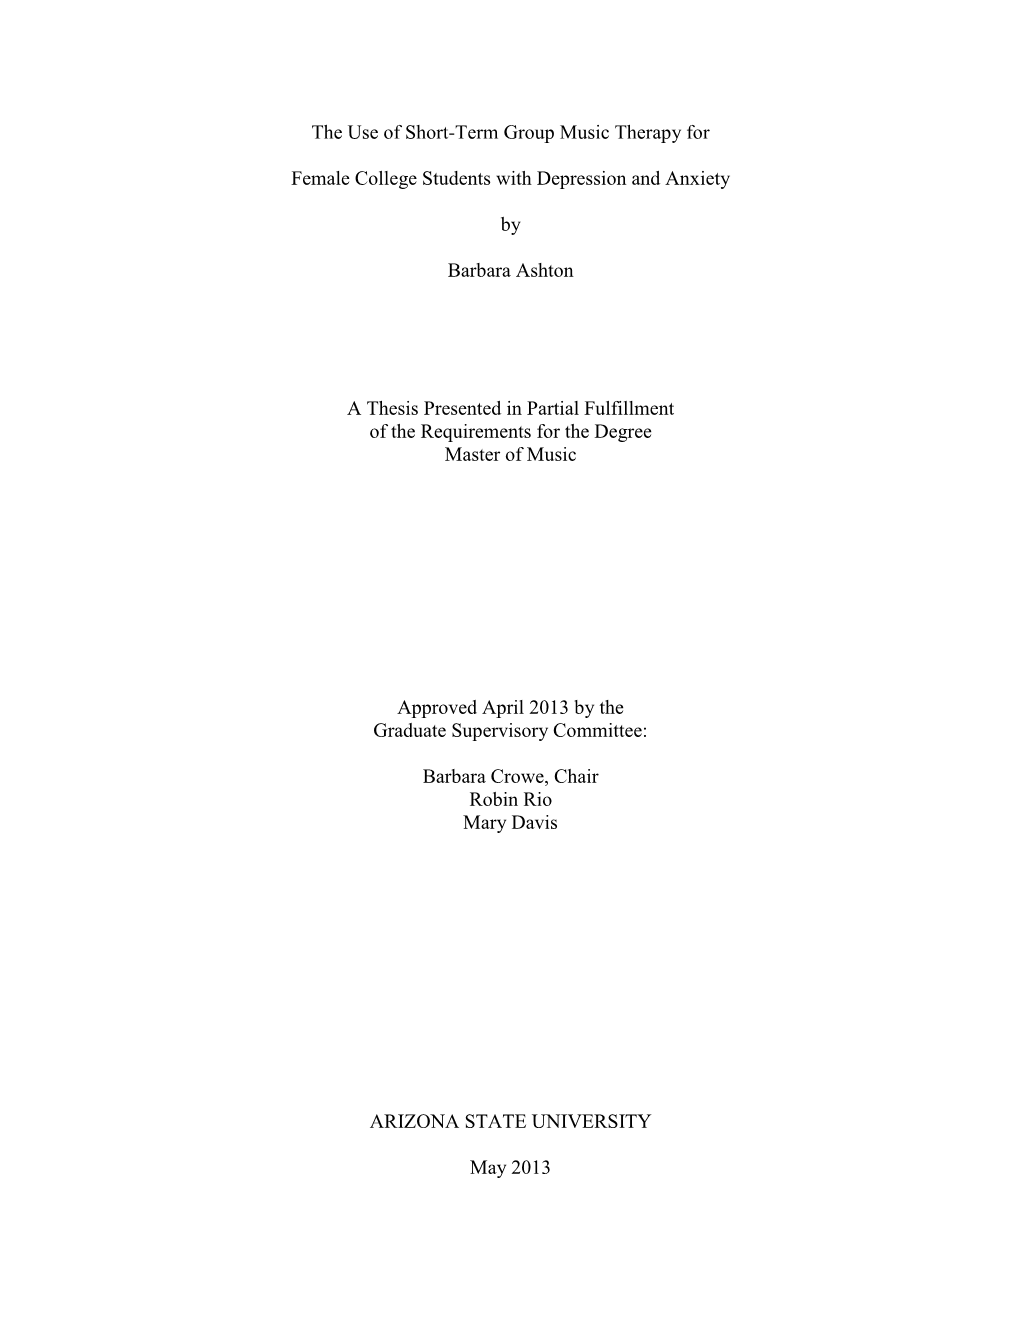 The Use of Short-Term Group Music Therapy for Female College Students with Depression and Anxiety by Barbara Ashton a Thesis P